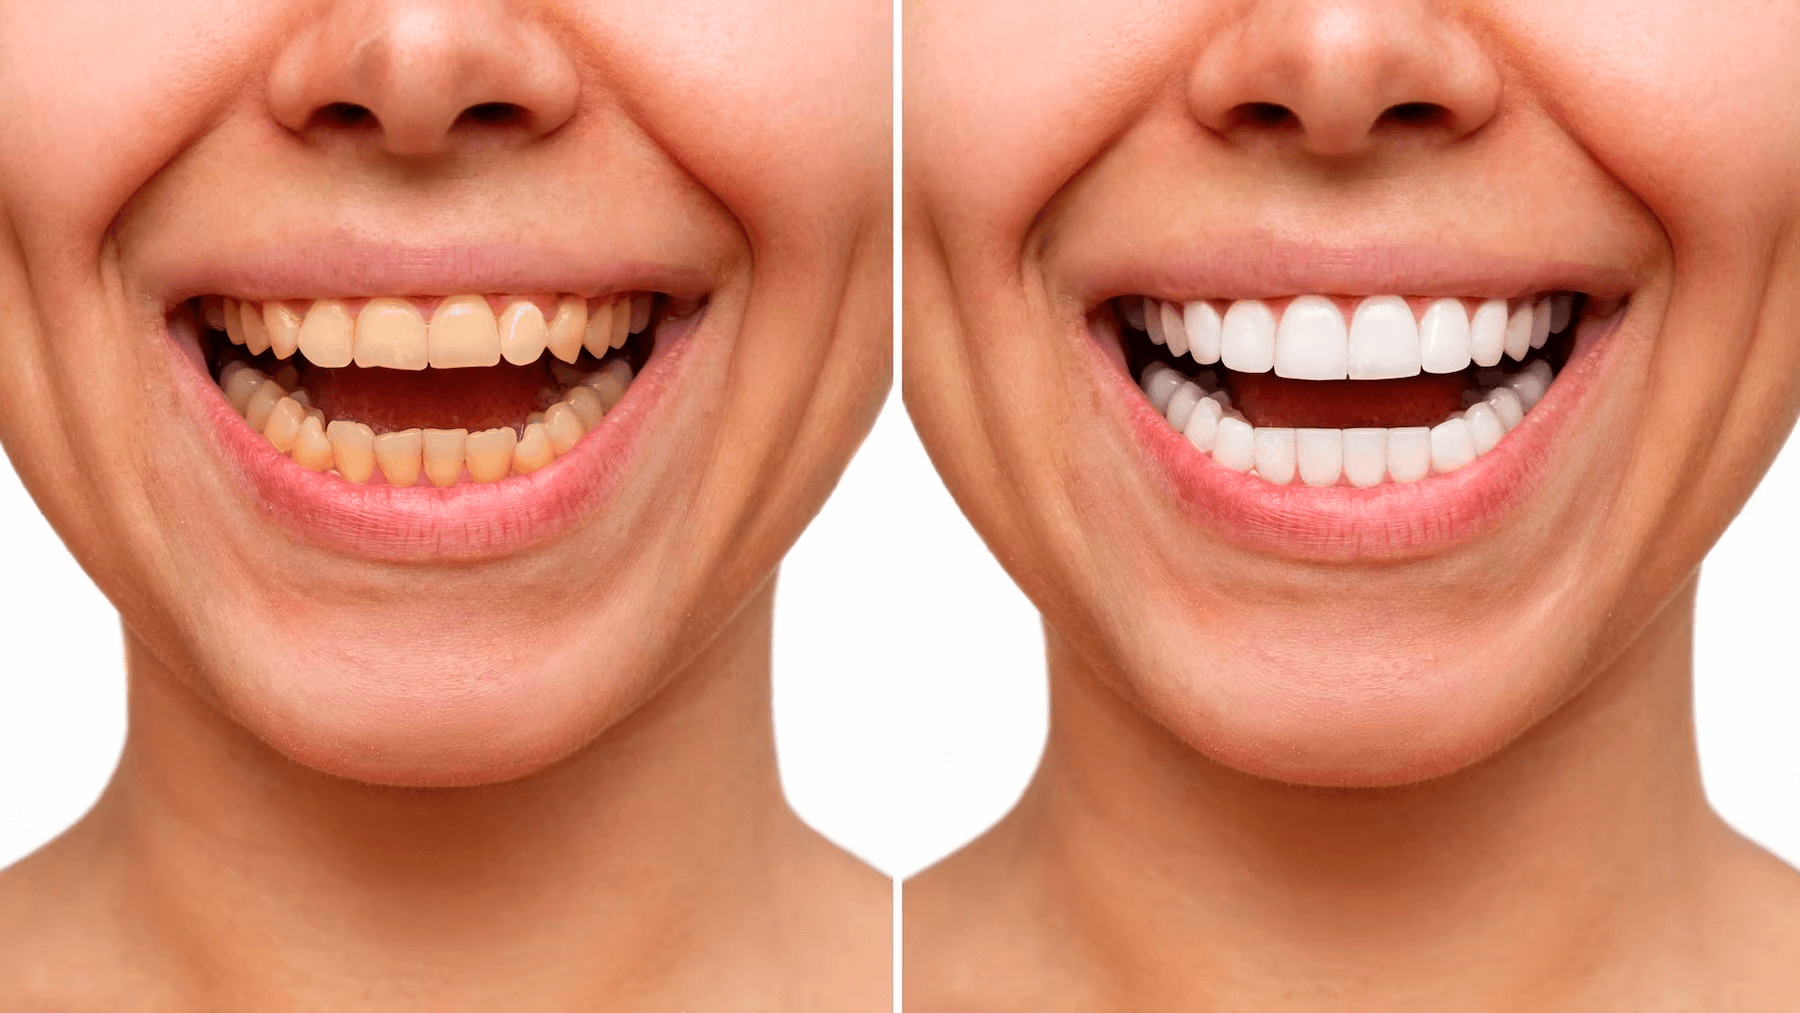 A comparison of teeth before and after a whitening treatment.